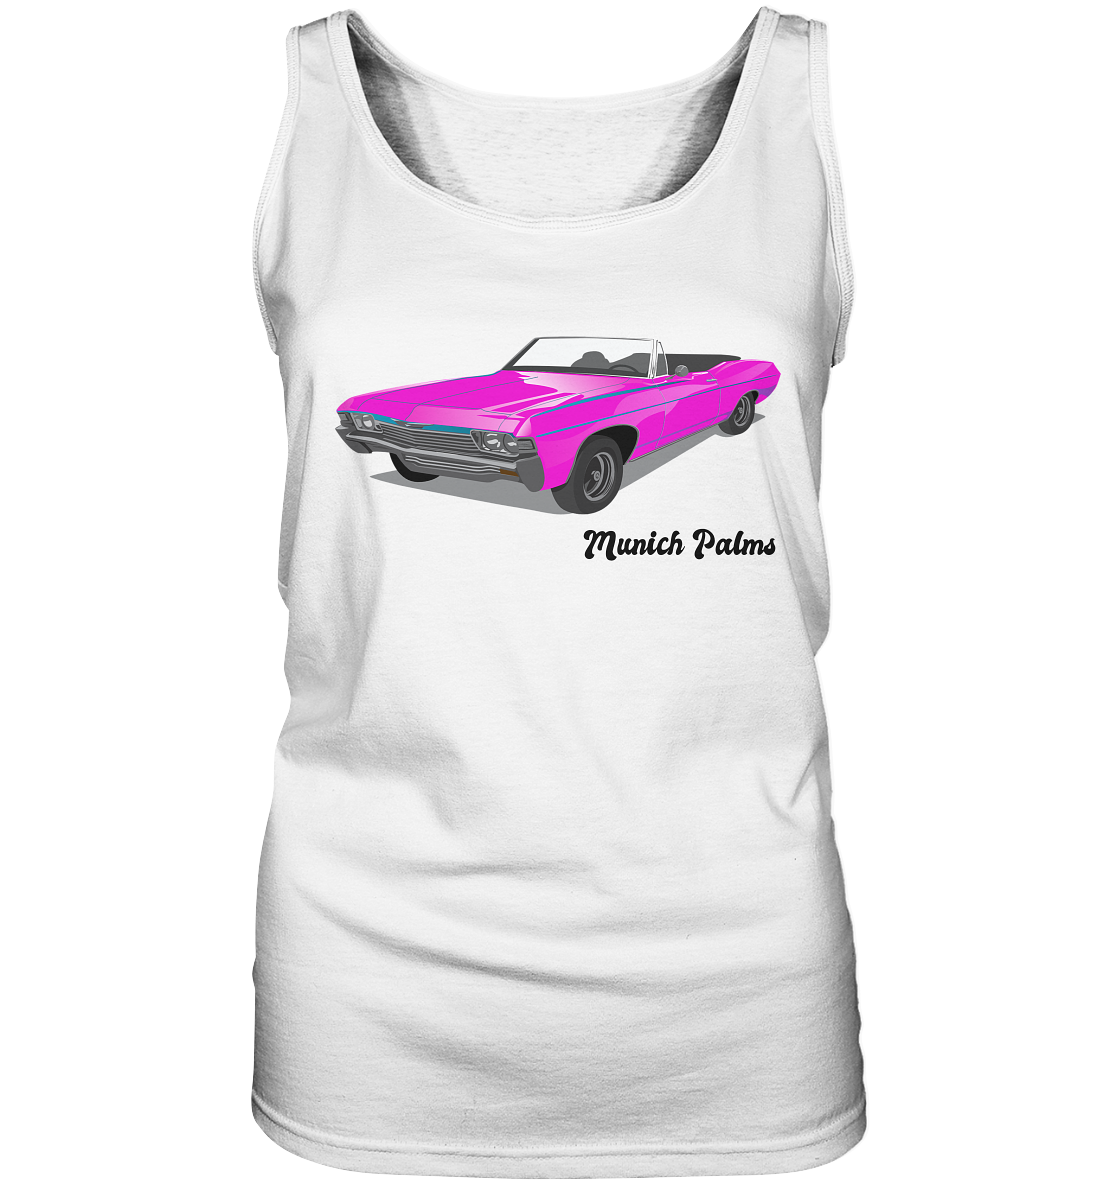 Pink Retro Classic Car Oldtimer, Car, Convertible by Munich Palms - Ladies Tank Top